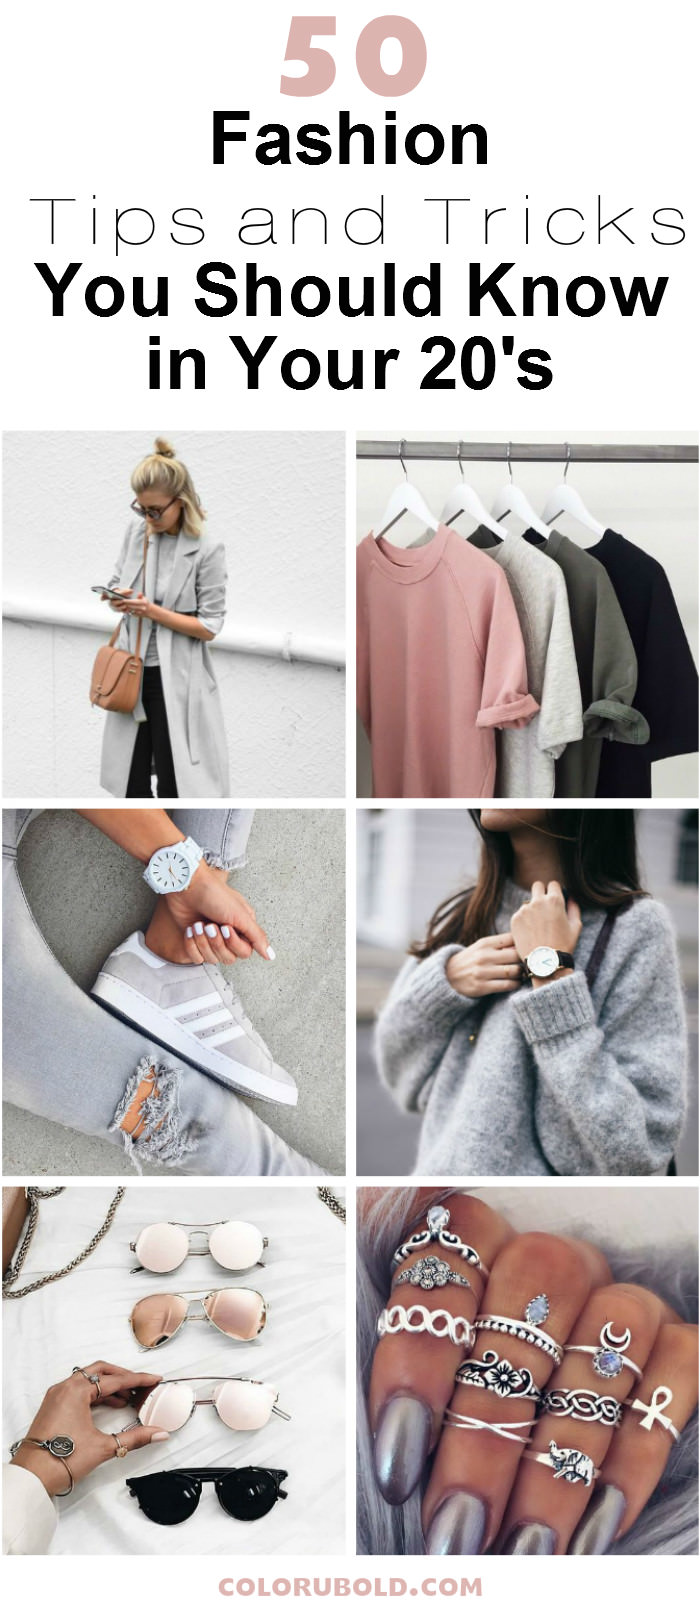 These 50 fashion tips and tricks are scoured from all over the internet and you'll love learning them (especially if you're in your 20's). Checkout!